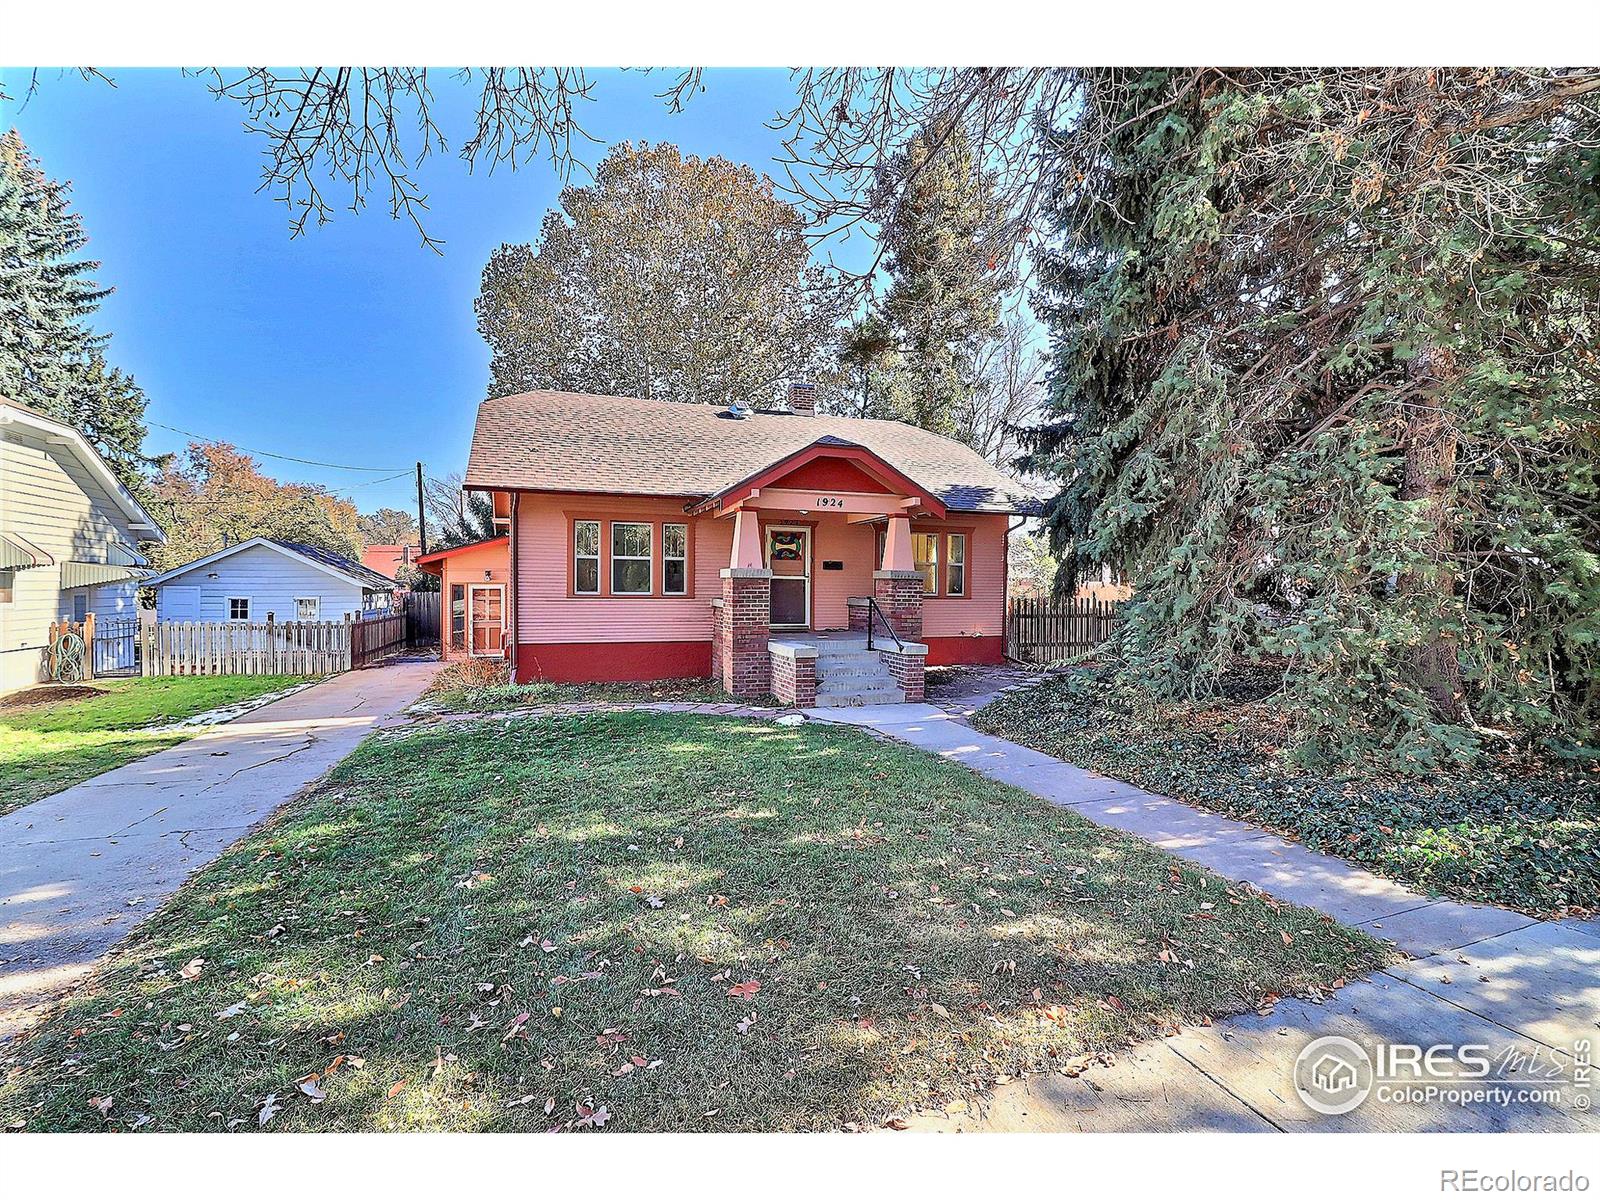 1924  13th Avenue, greeley MLS: 456789999163 Beds: 5 Baths: 2 Price: $489,900